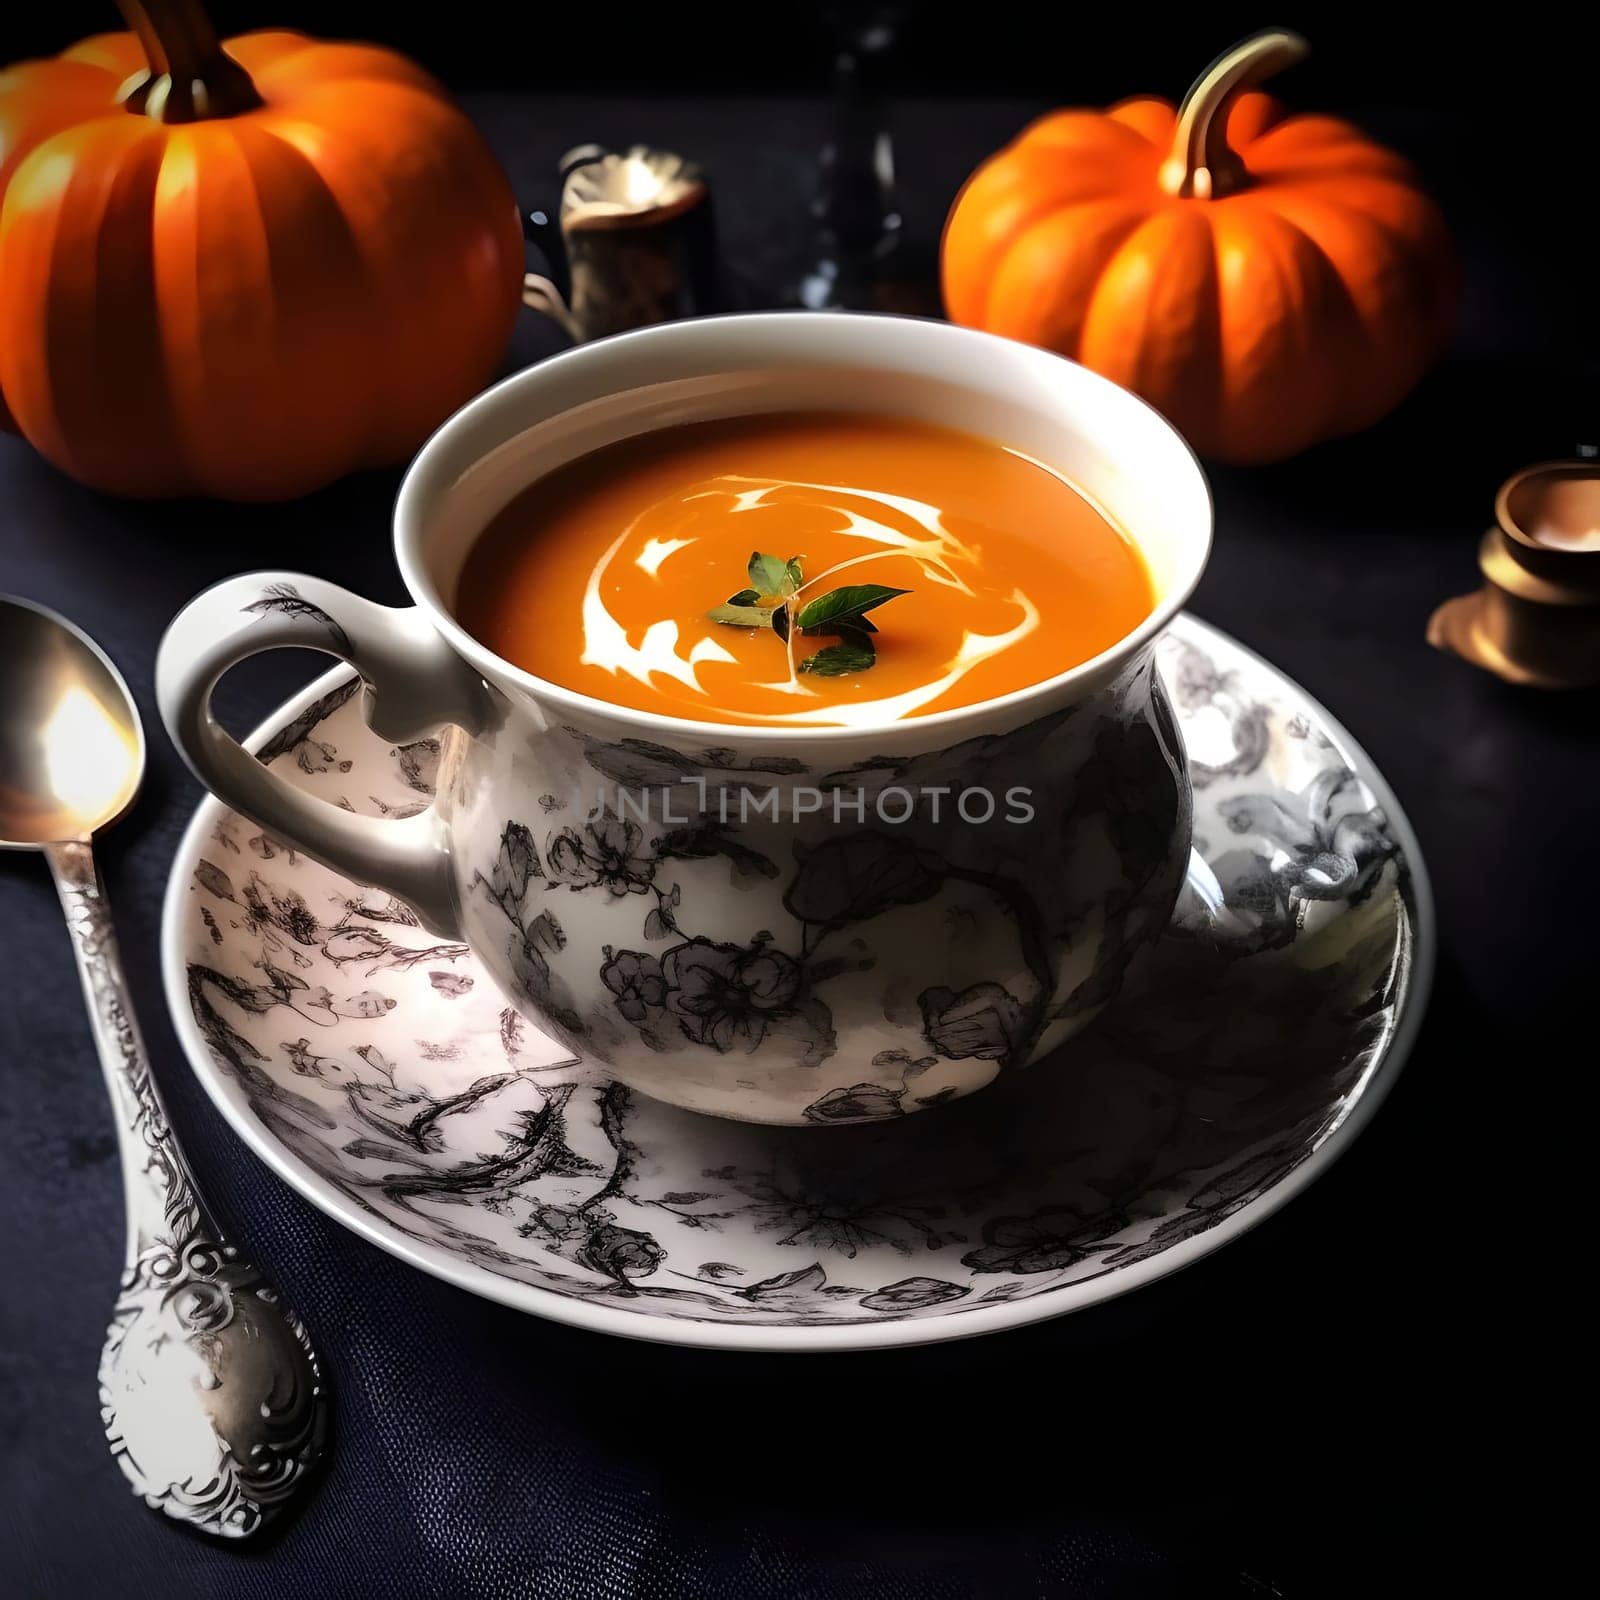 Decorated Porcelain Cup and Plate with pumpkin soup in it. Pumpkin as a dish of thanksgiving for the harvest. An atmosphere of joy and celebration.